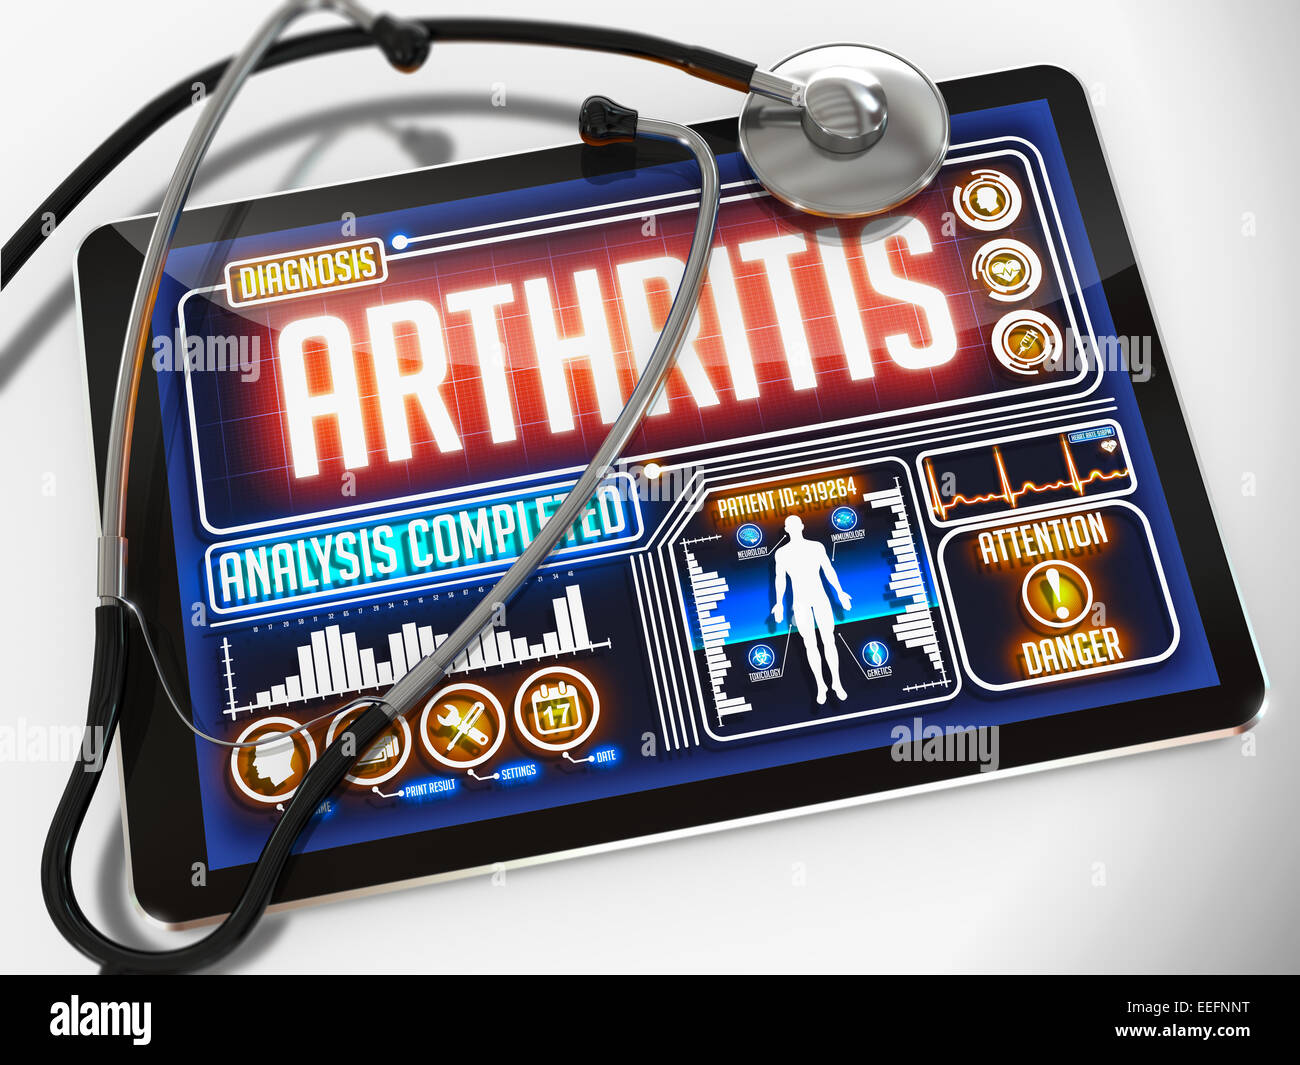 Arthritis on the Display of Medical Tablet. Stock Photo